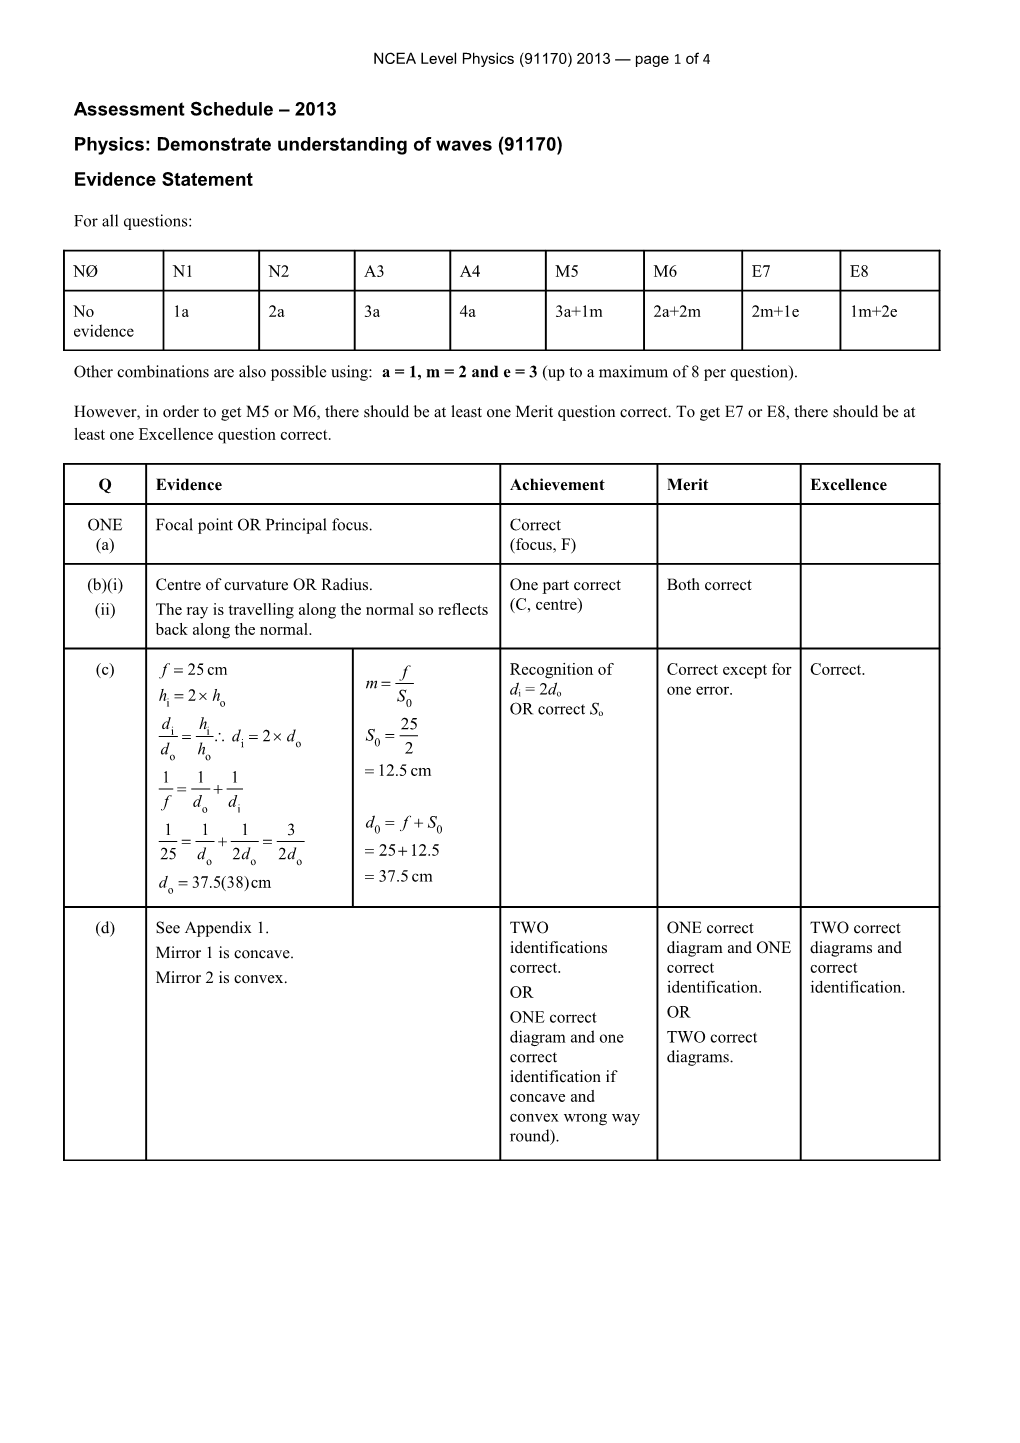 NCEA Level Physics (91170) 2013 Assessment Schedule